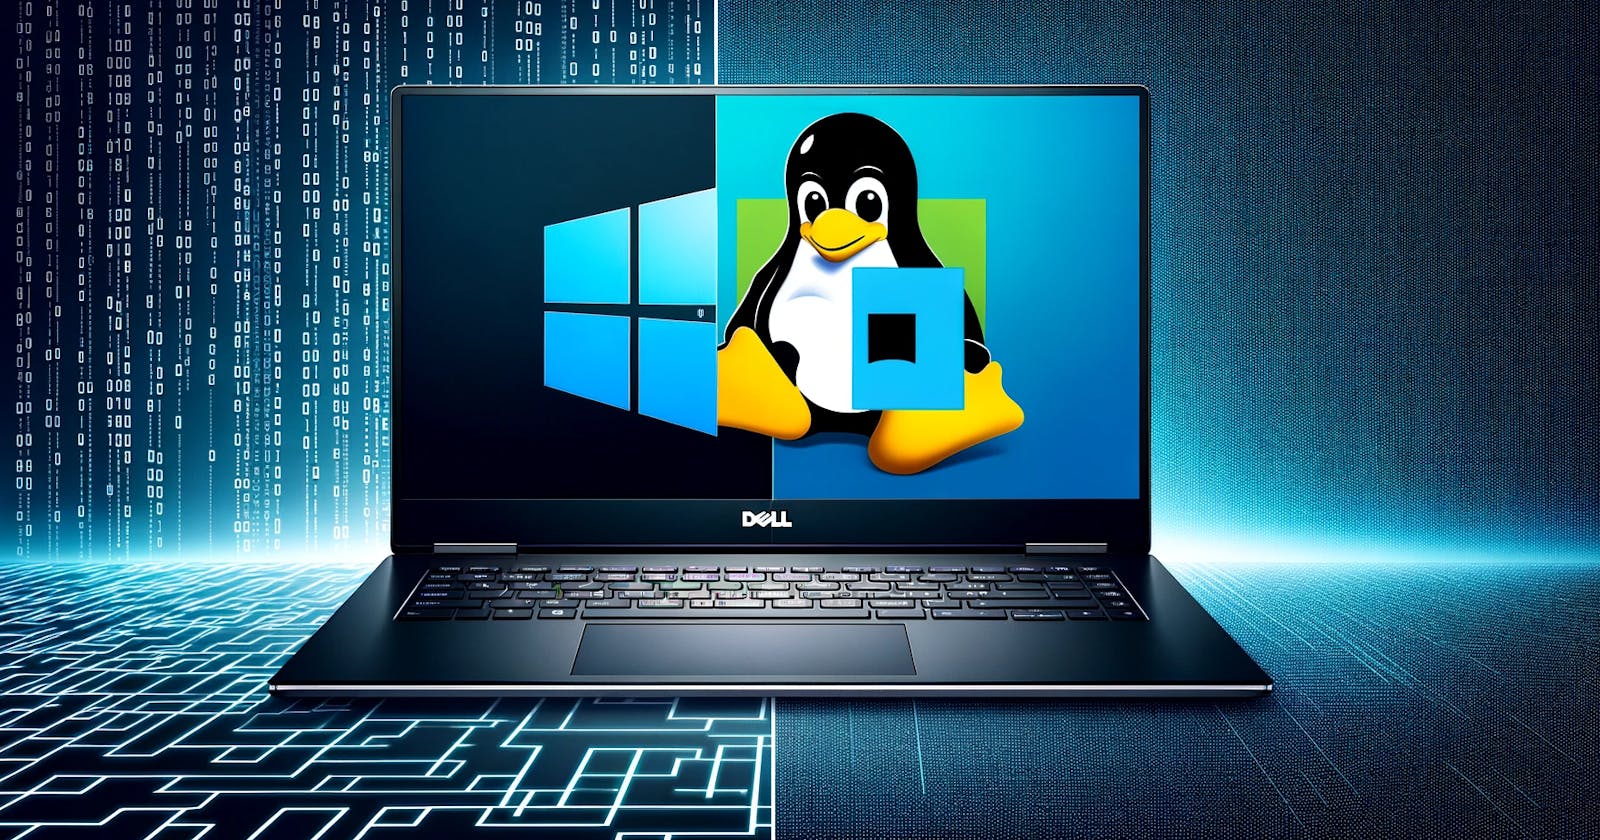 How to dual boot Dell XPS 9500 - Windows and Linux